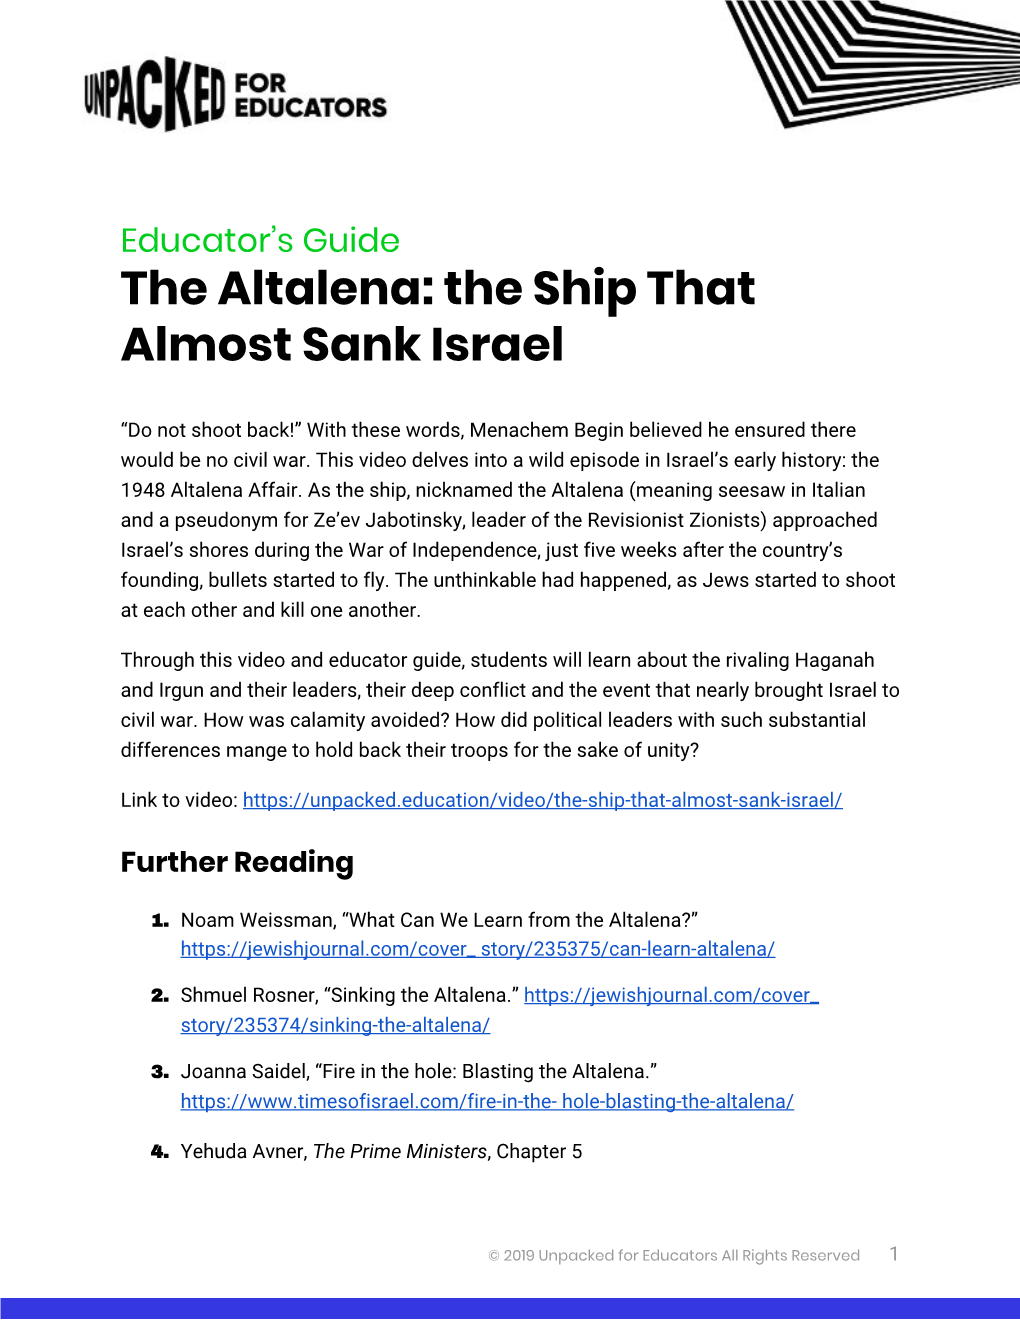 The Altalena: the Ship That Almost Sank Israel